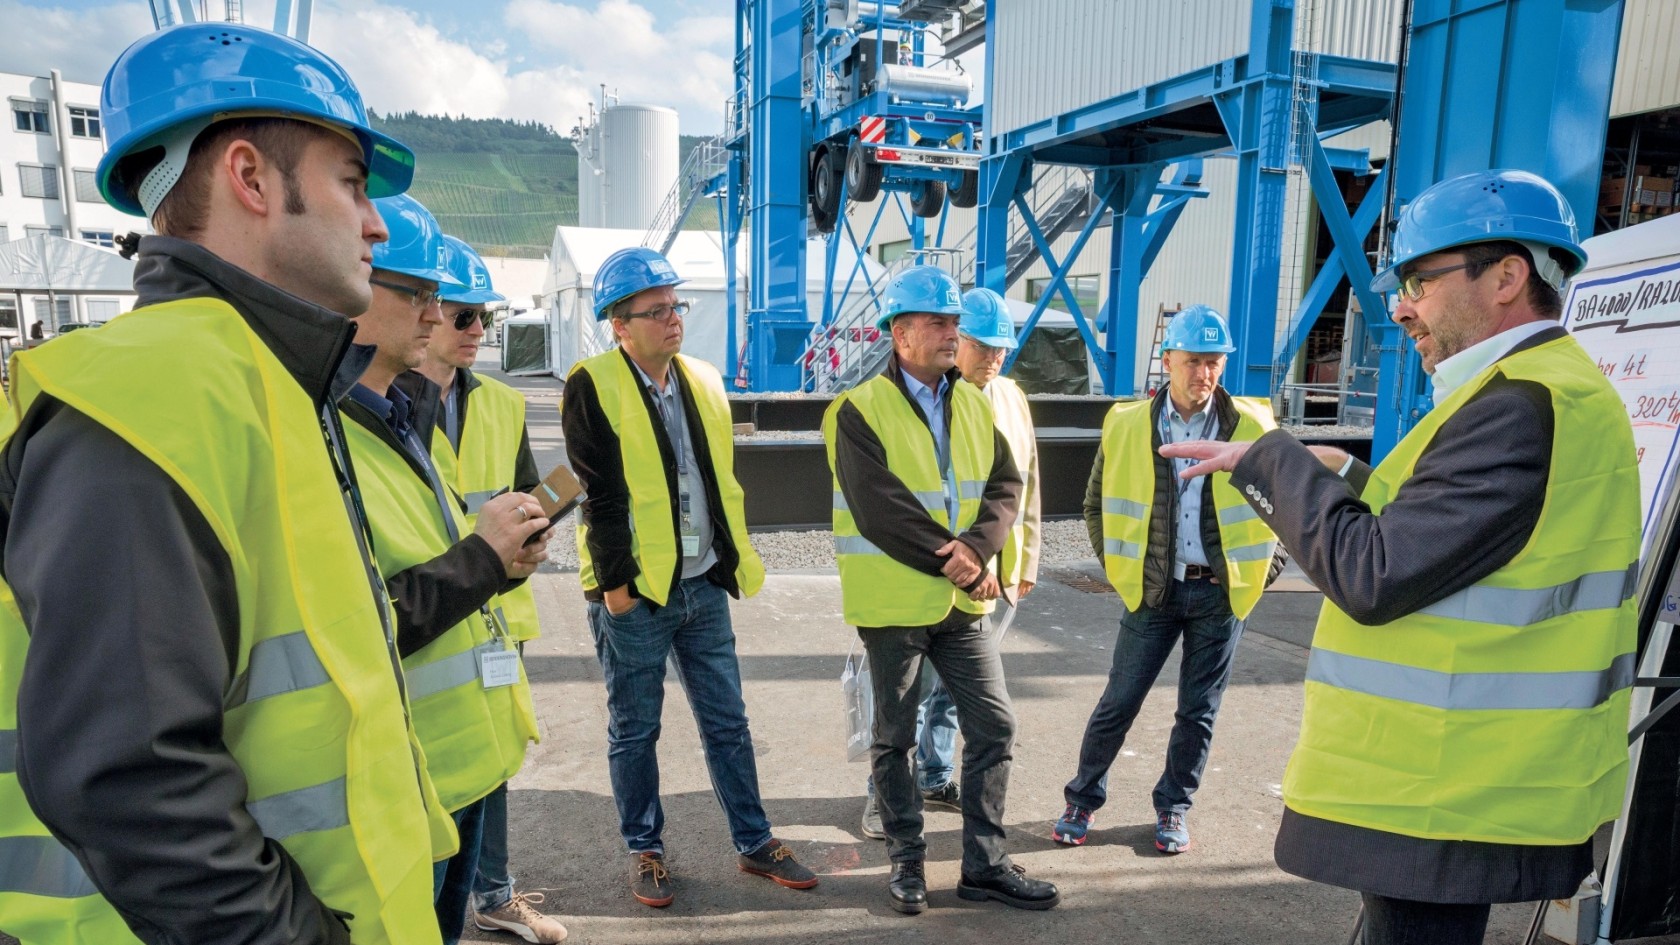 Training group with safety vests and blue helmets in front of Benninghoven plant